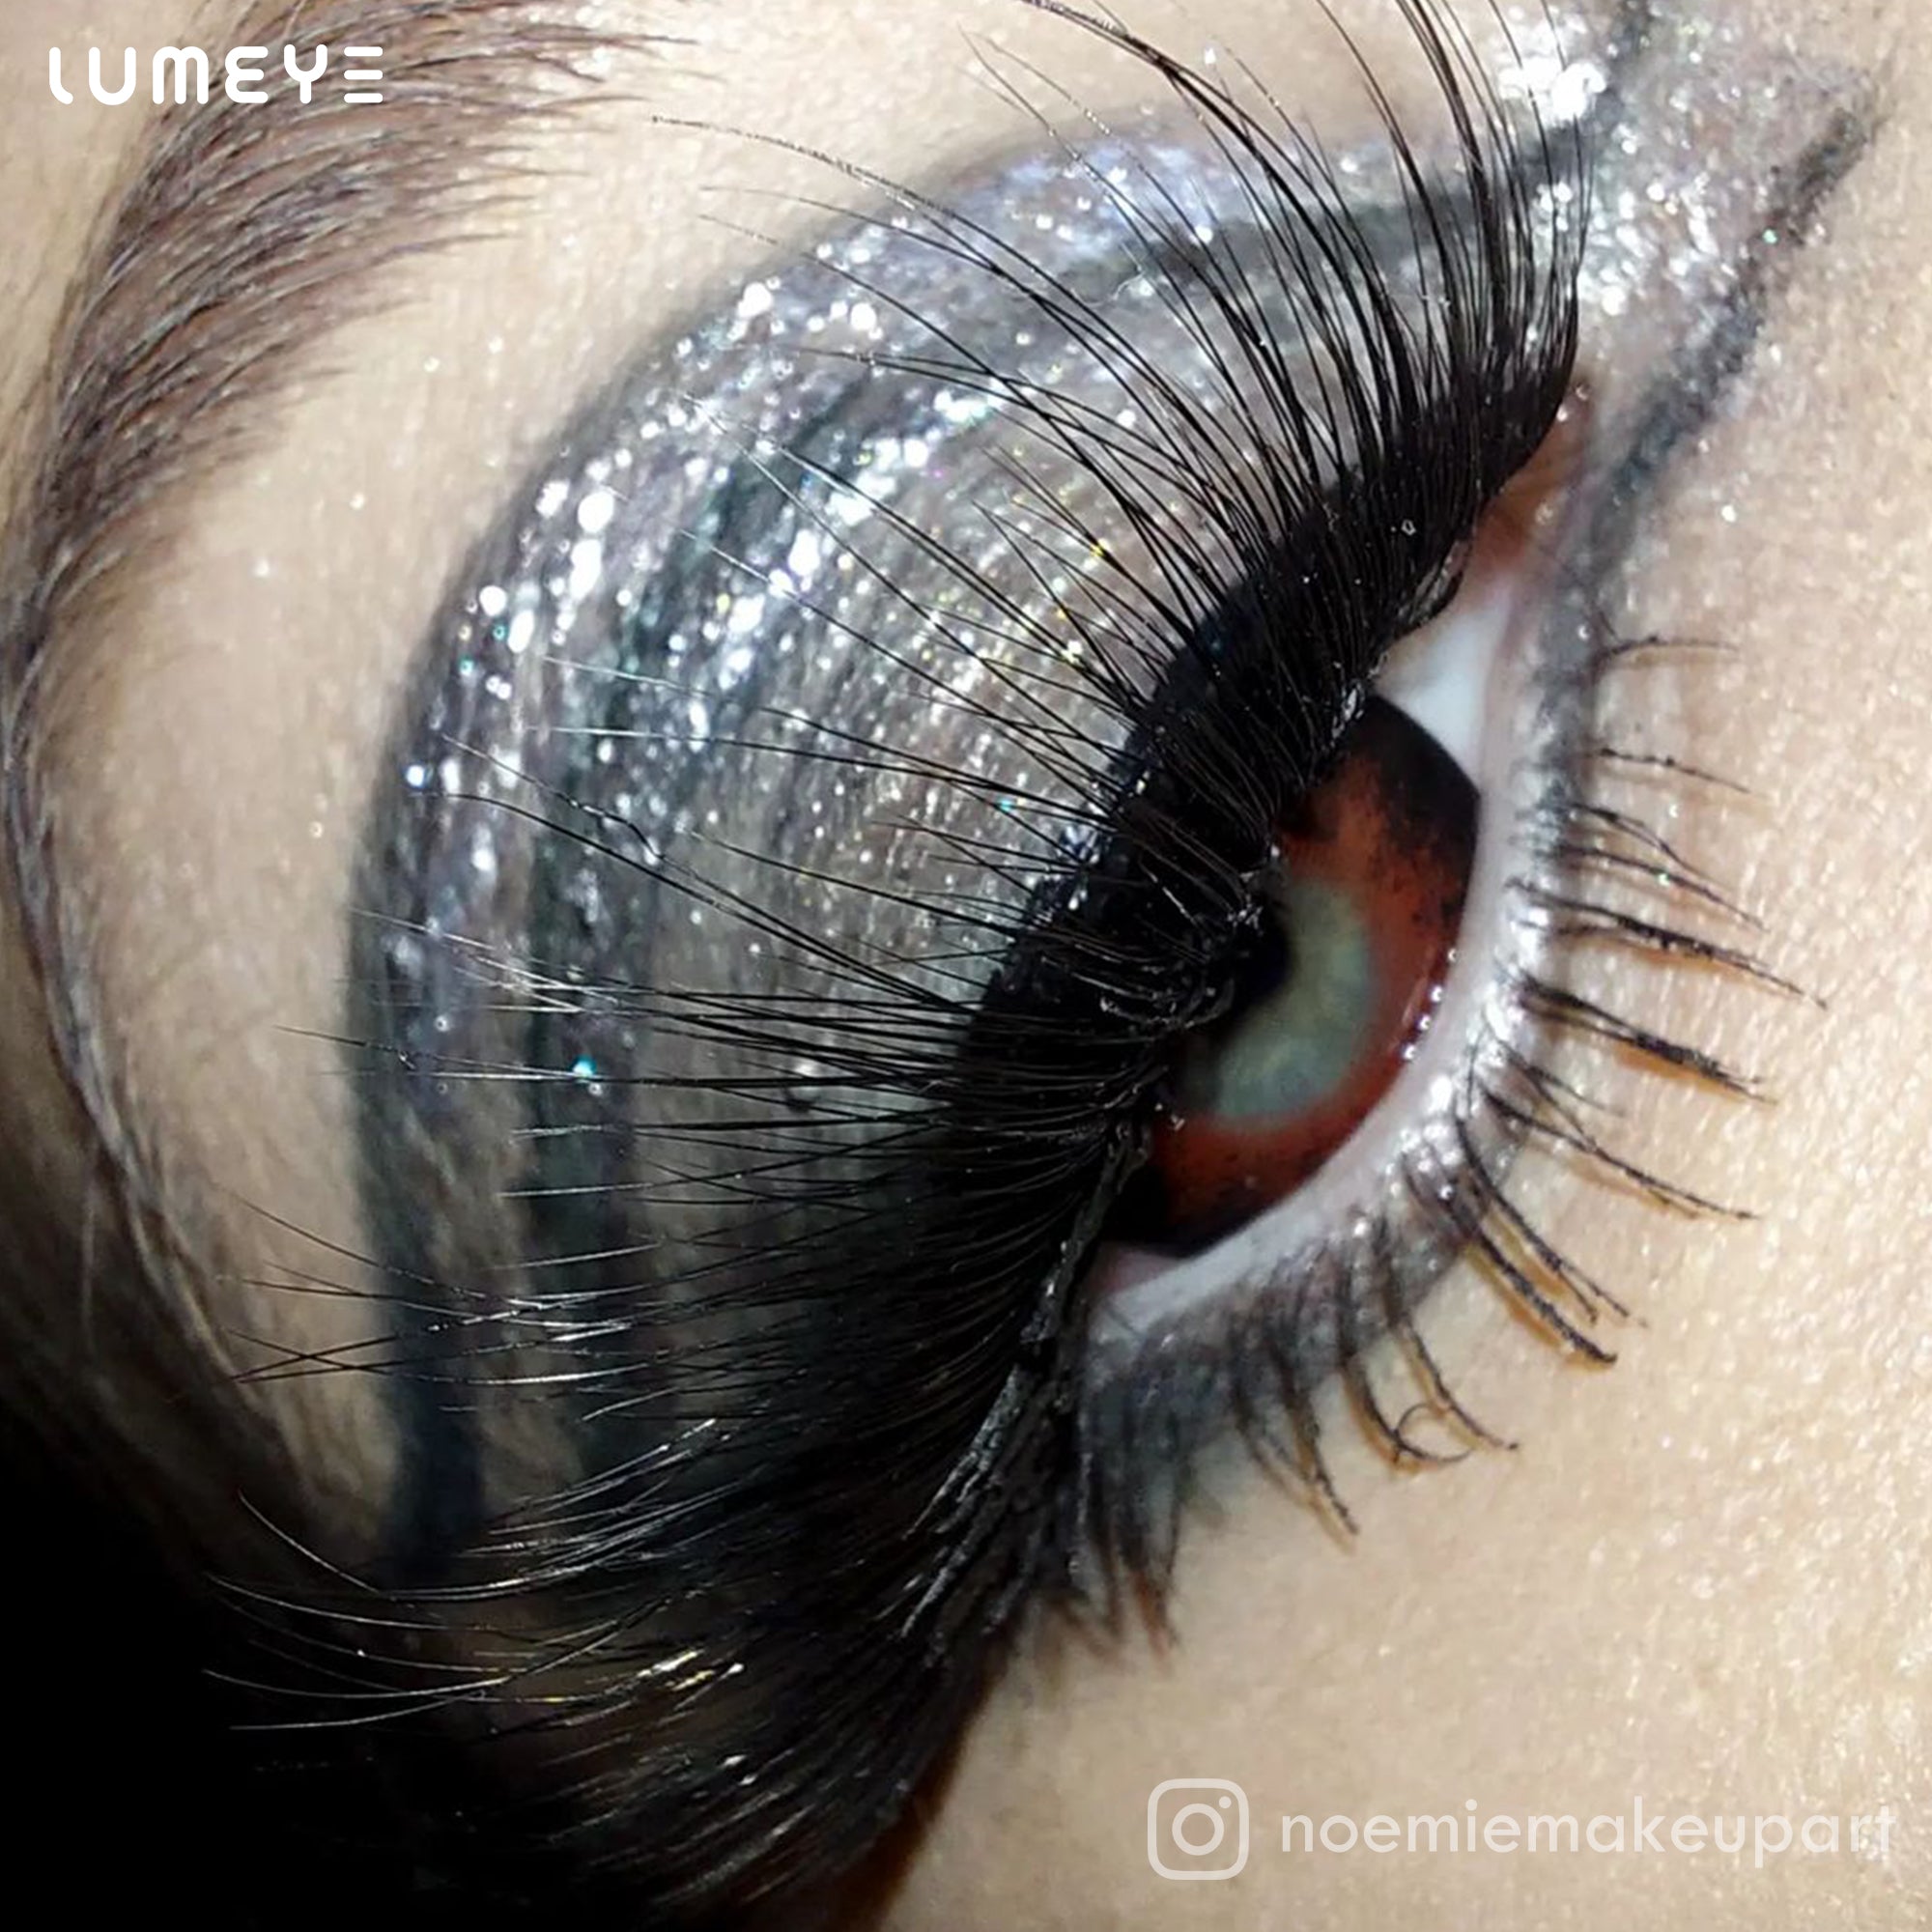 Best COLORED CONTACTS - LUMEYE Dangerous Black Colored Contact Lenses - LUMEYE